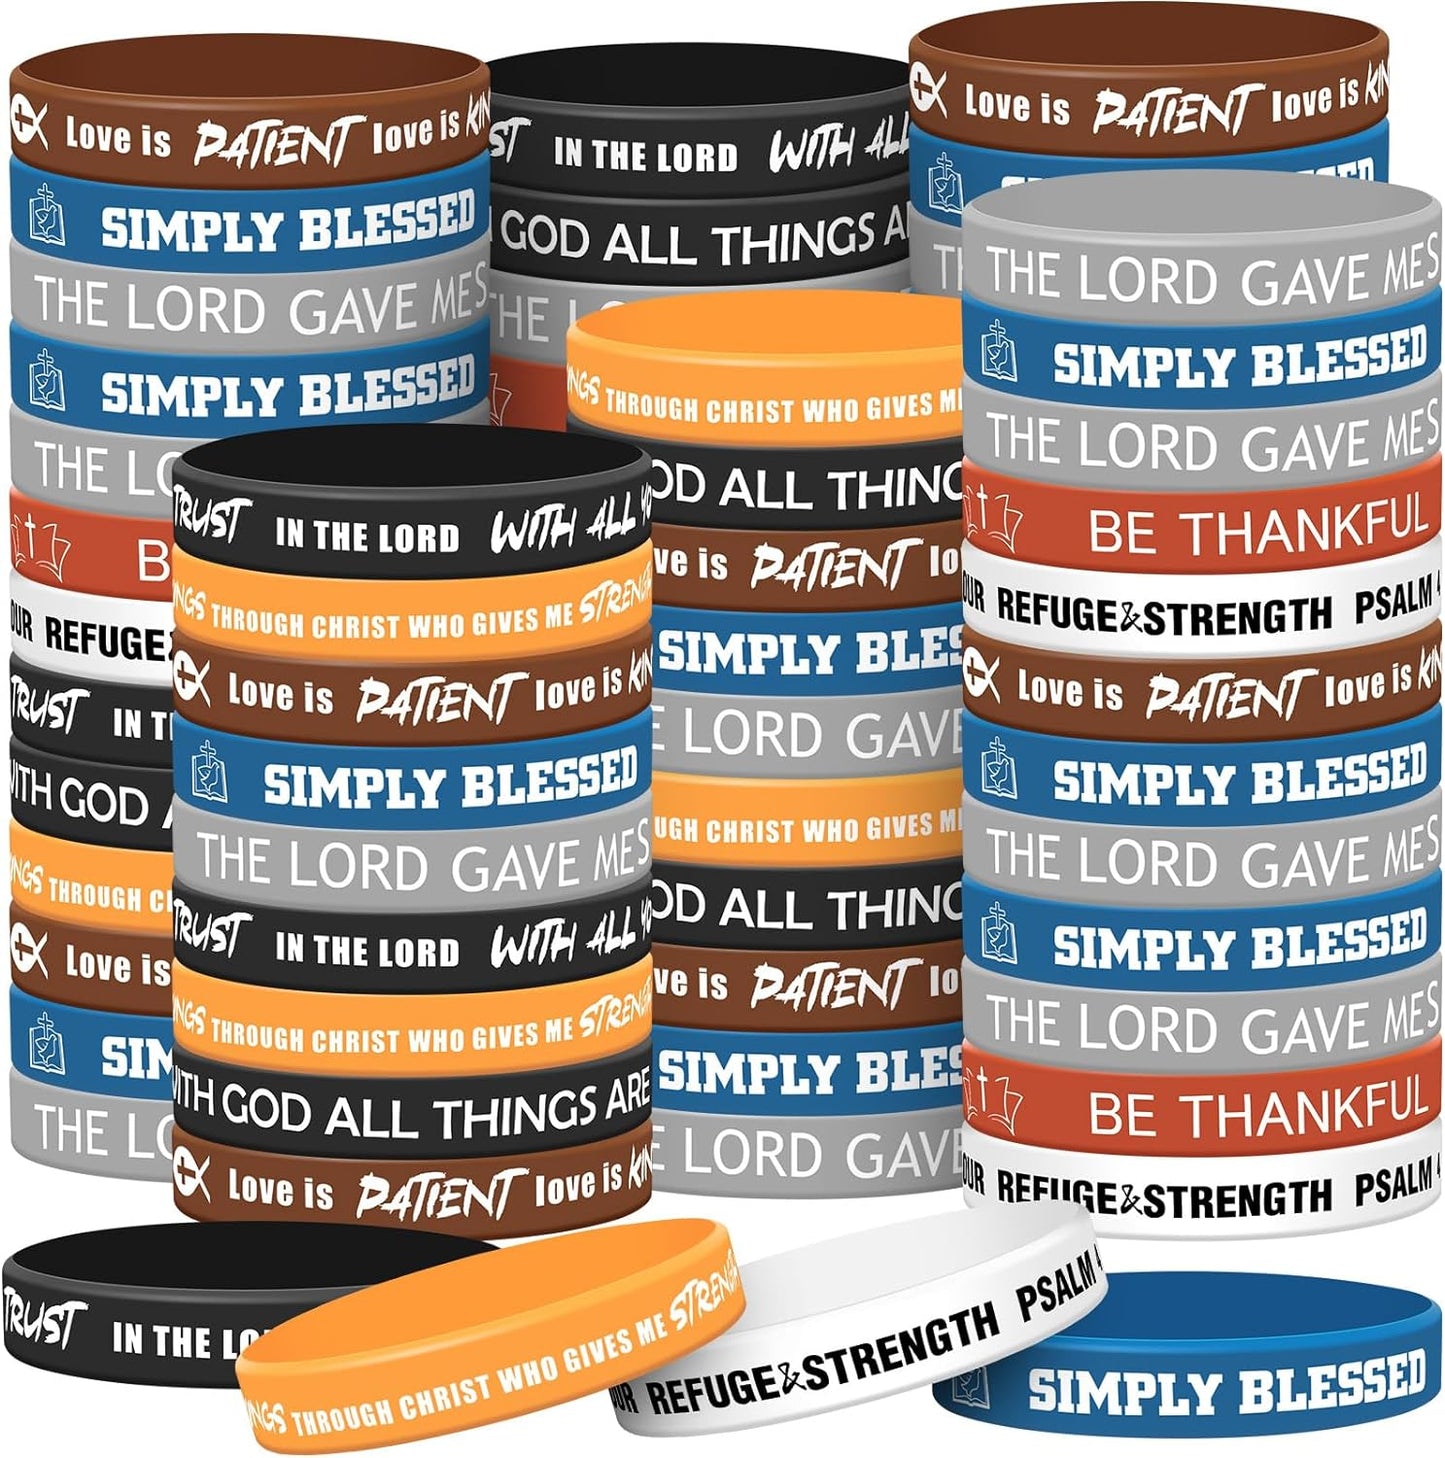 200 Pcs Religious Scripture Rubber Bracelets with Bible Verses Christian Gift Idea claimedbygoddesigns